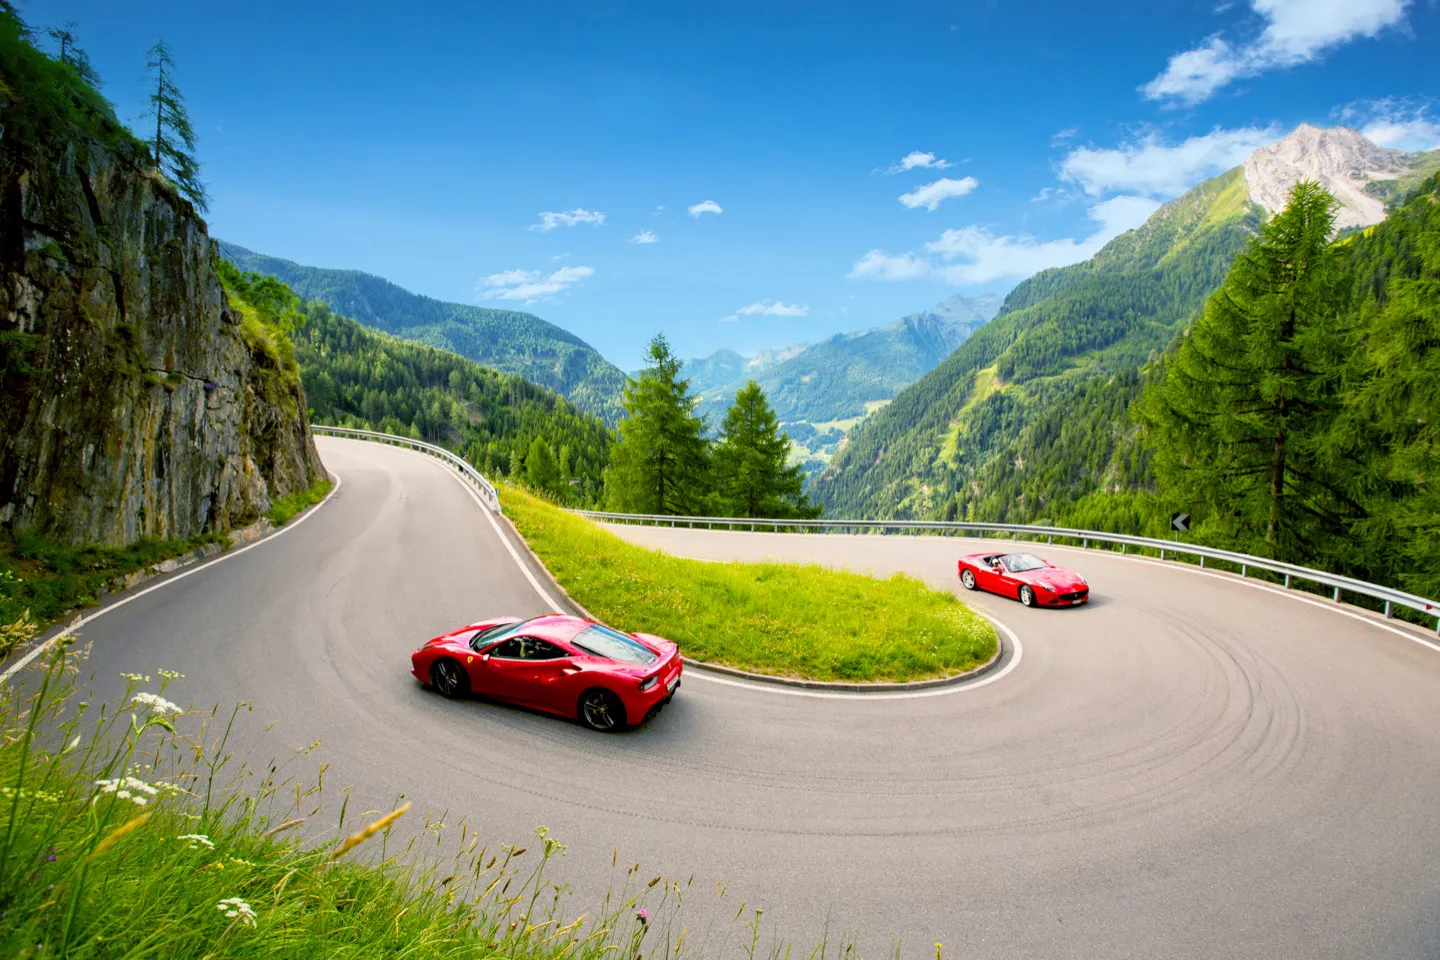 Stay in a junior suite and enjoy a supercar drive day on a luxury stay drive package